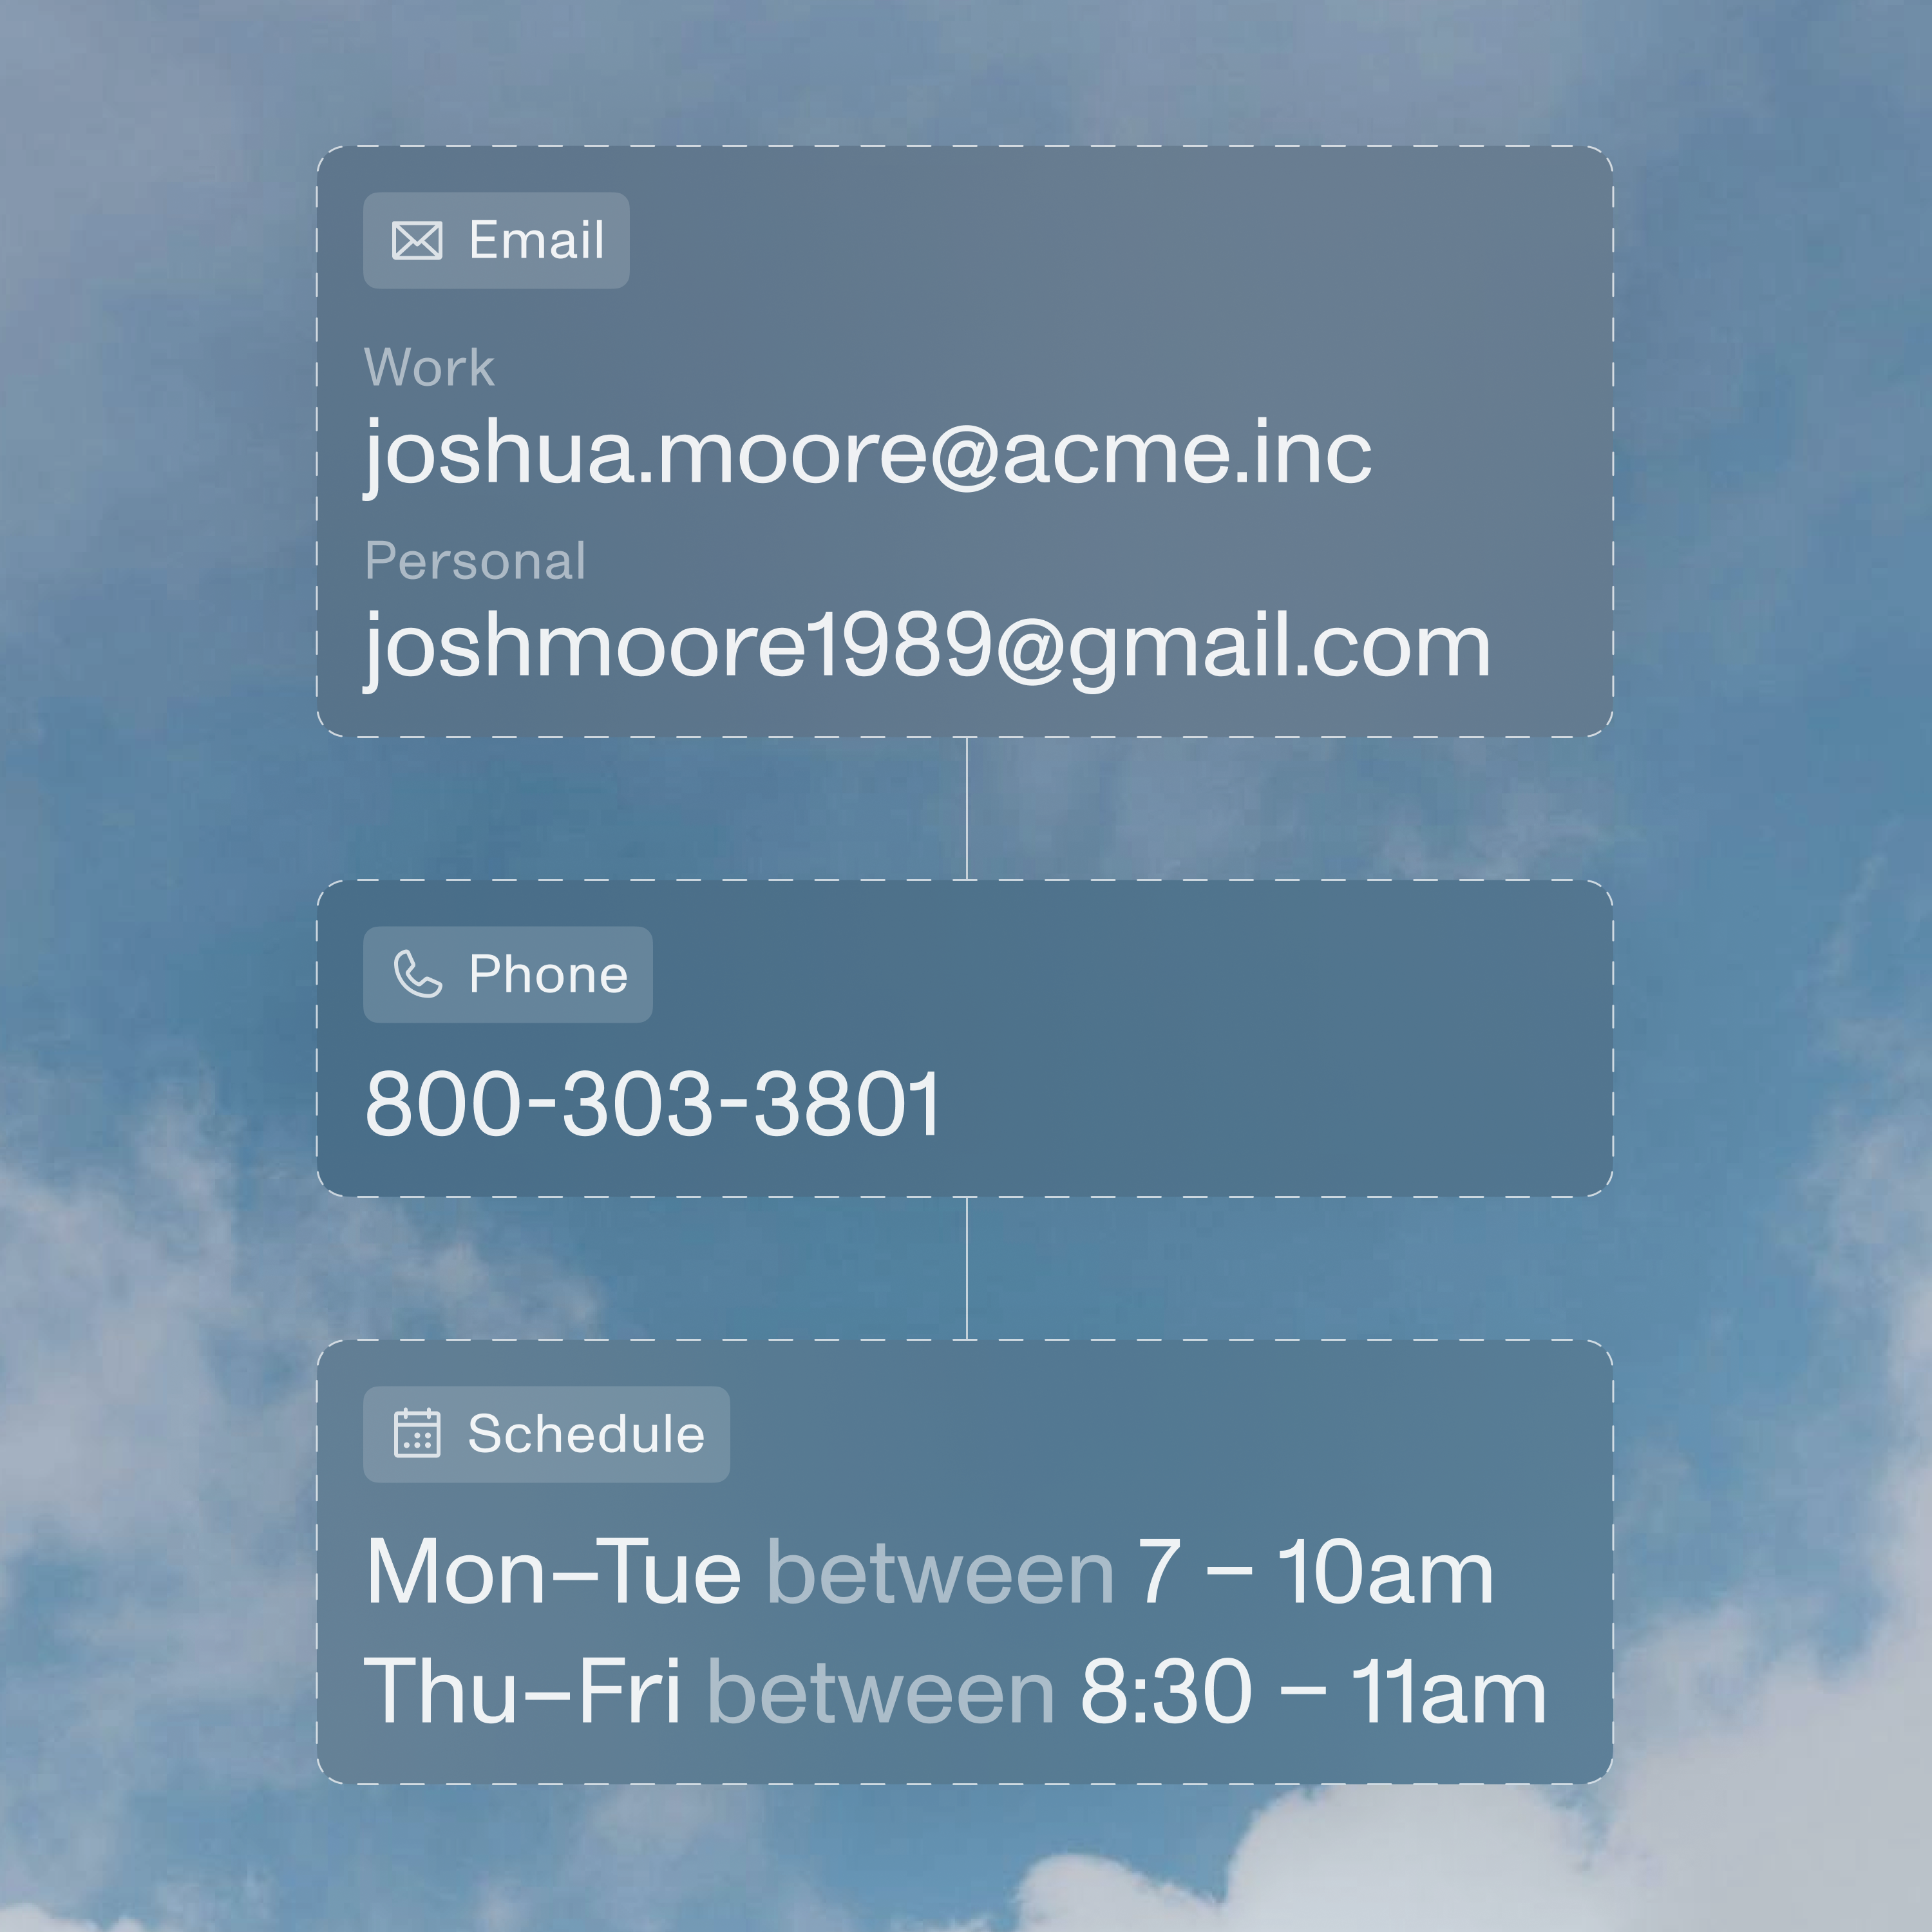 Three different contact cards stacked on top of each other. The first card lists emails, the second lists phone numbers, and the third lists meeting availability.